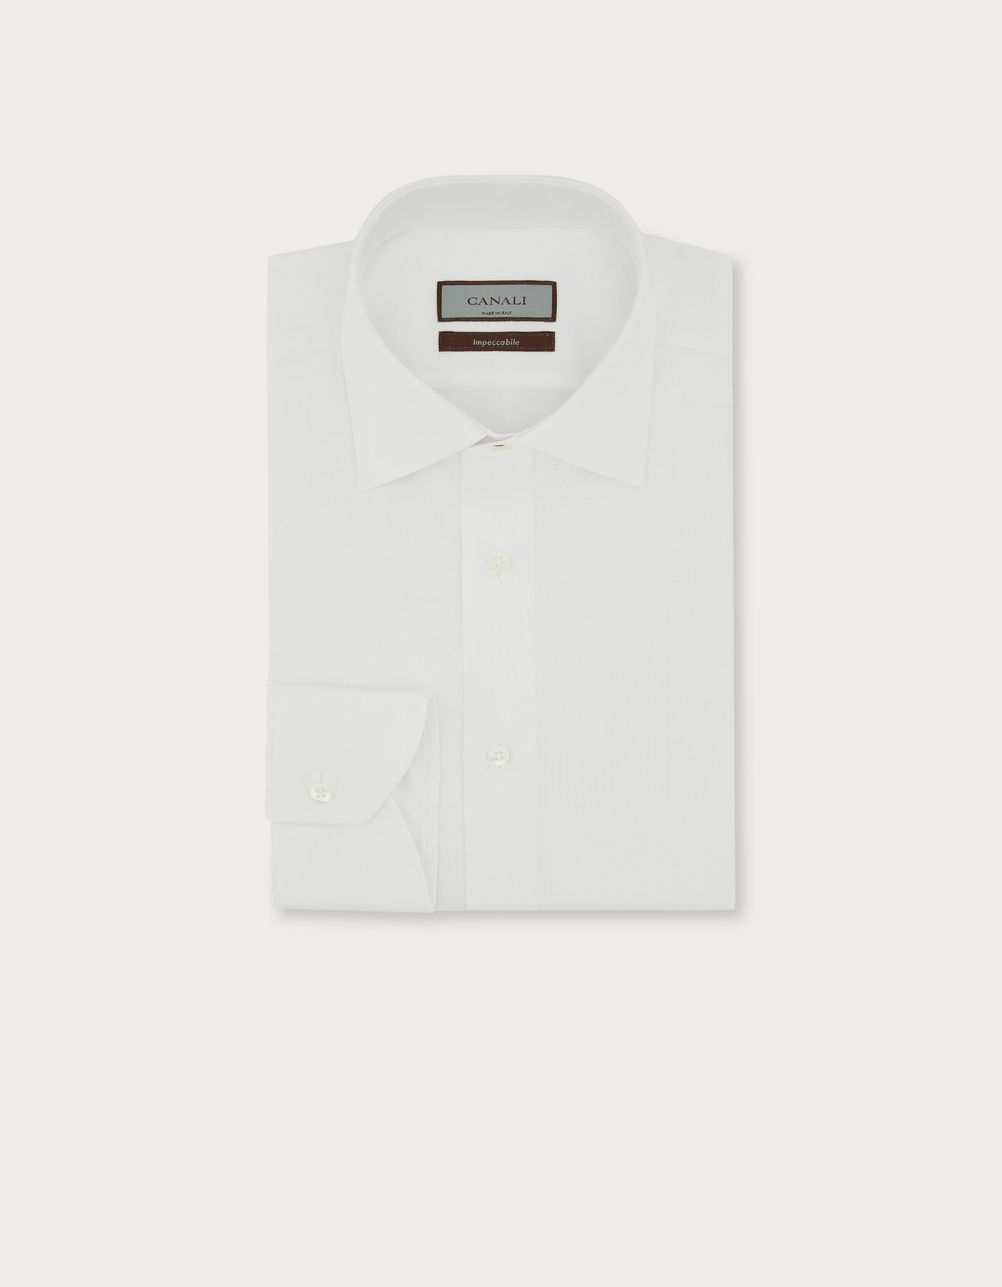 Slim-fit shirt in white Impeccable cotton with a very fine weave